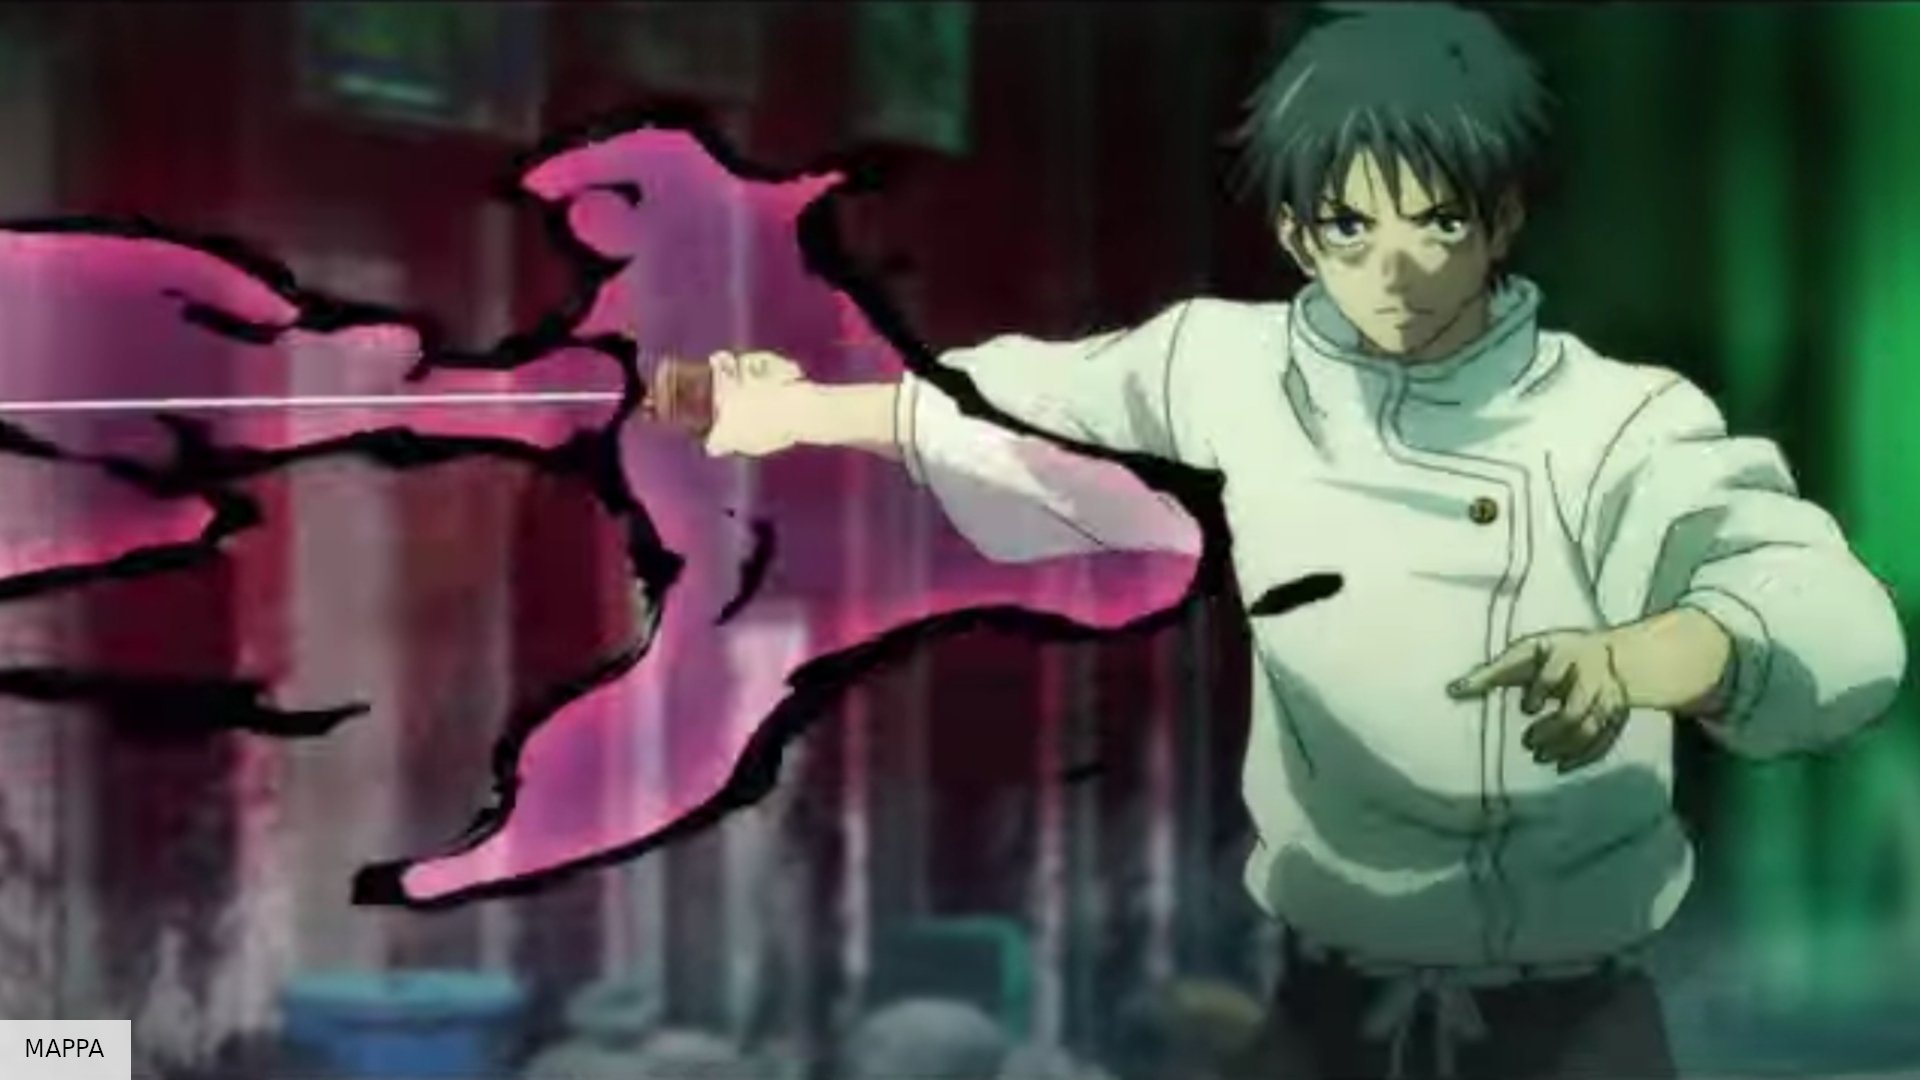 Jujutsu Kaisen 0 trailer introduces new heroes for anime series prequel. The Digital Fix